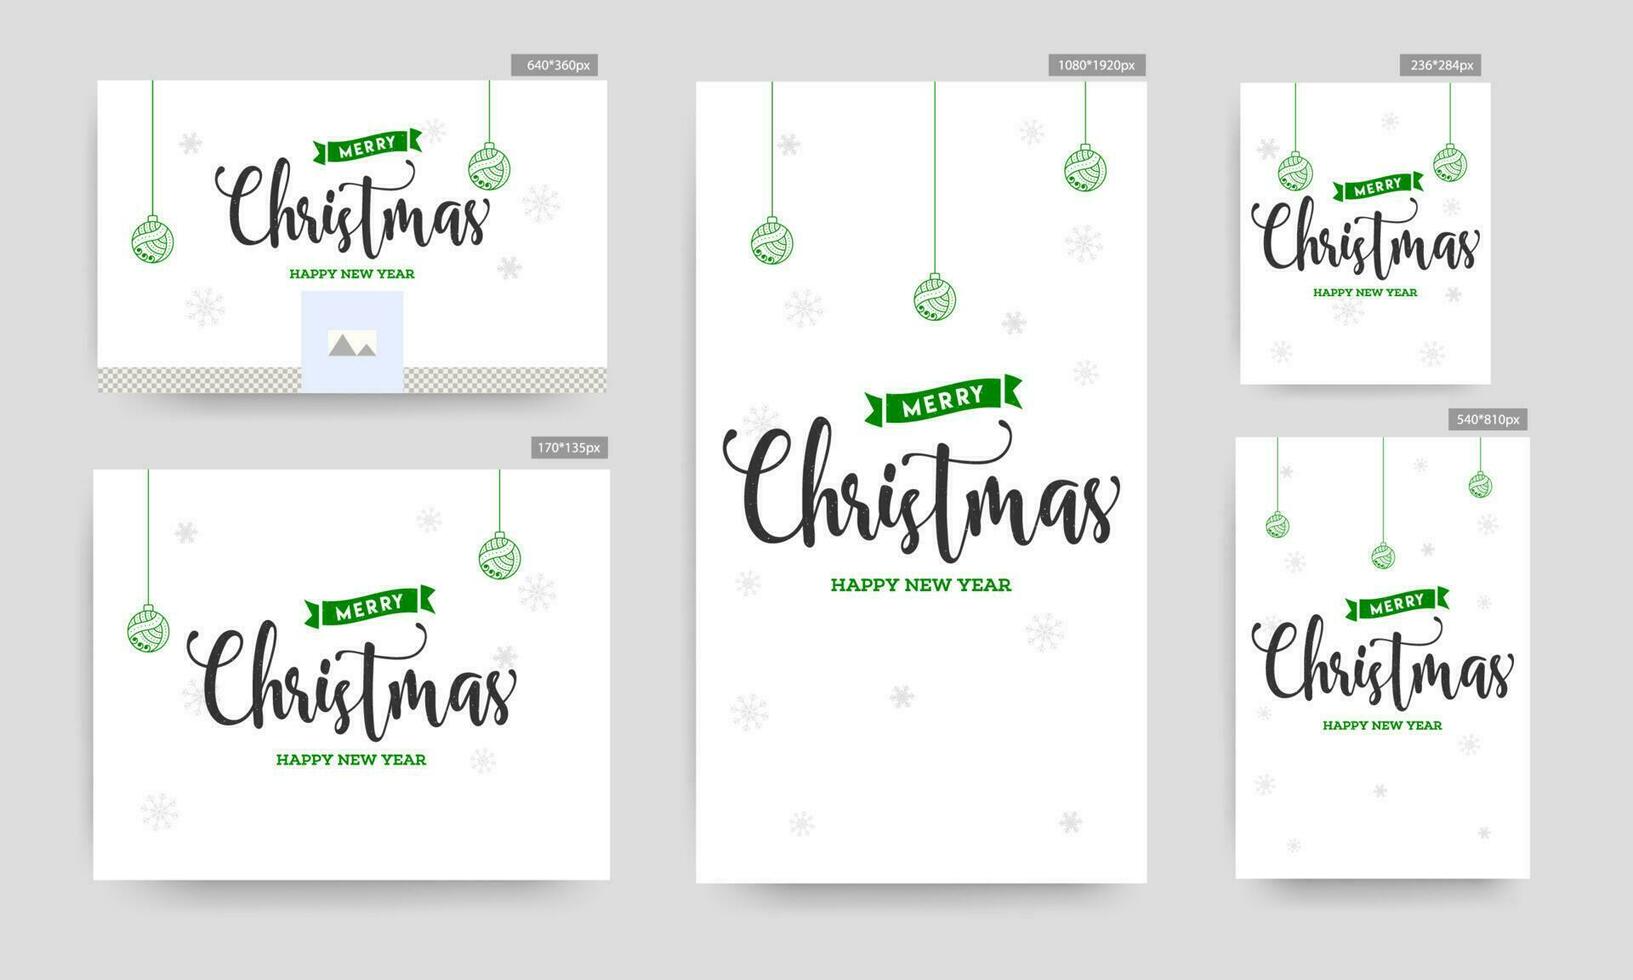 Merry Christmas and Happy New Year poster and template or greeting card design with hanging lanterns and snowflake decorated on white background. vector